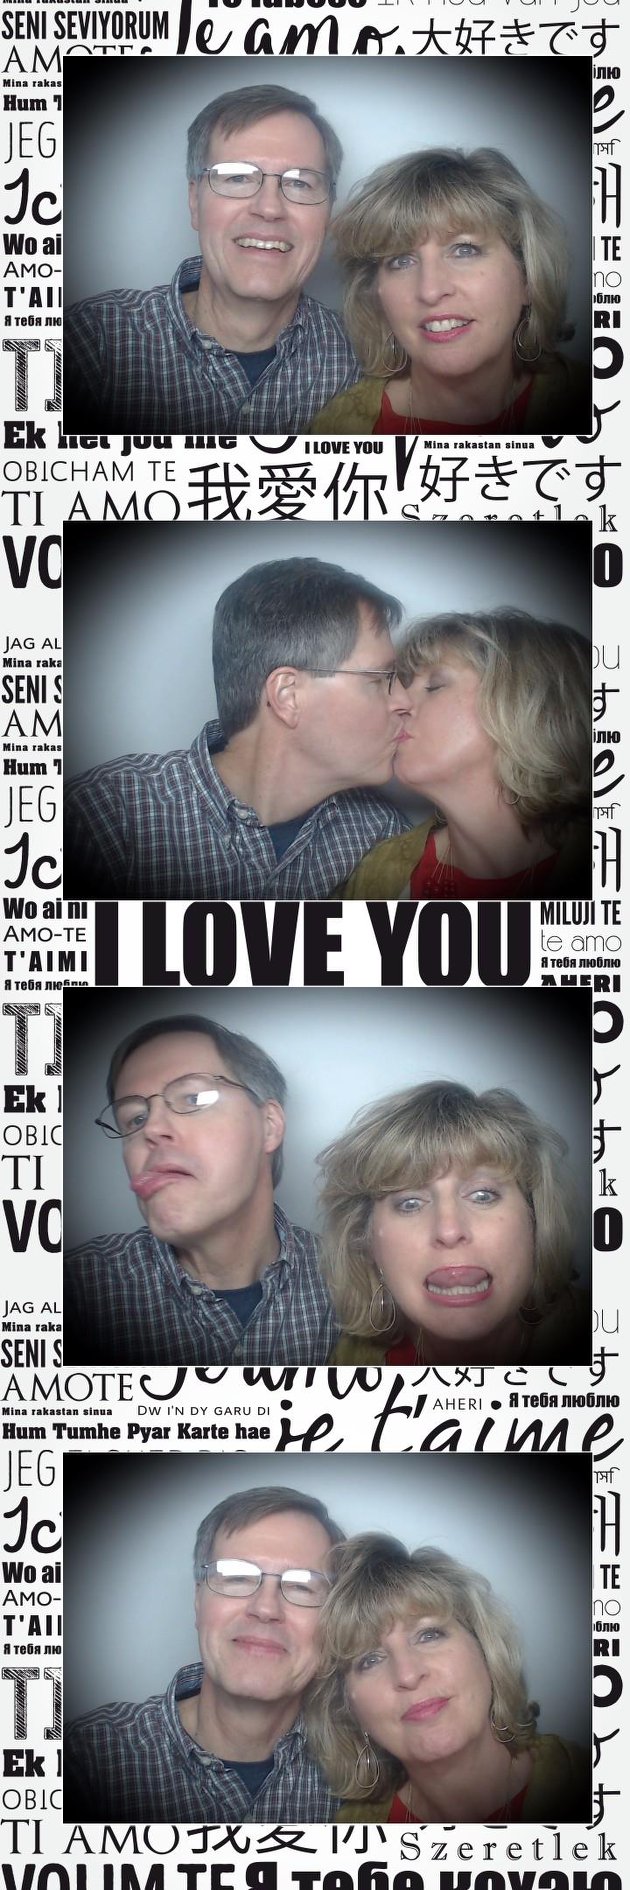 Photo booth